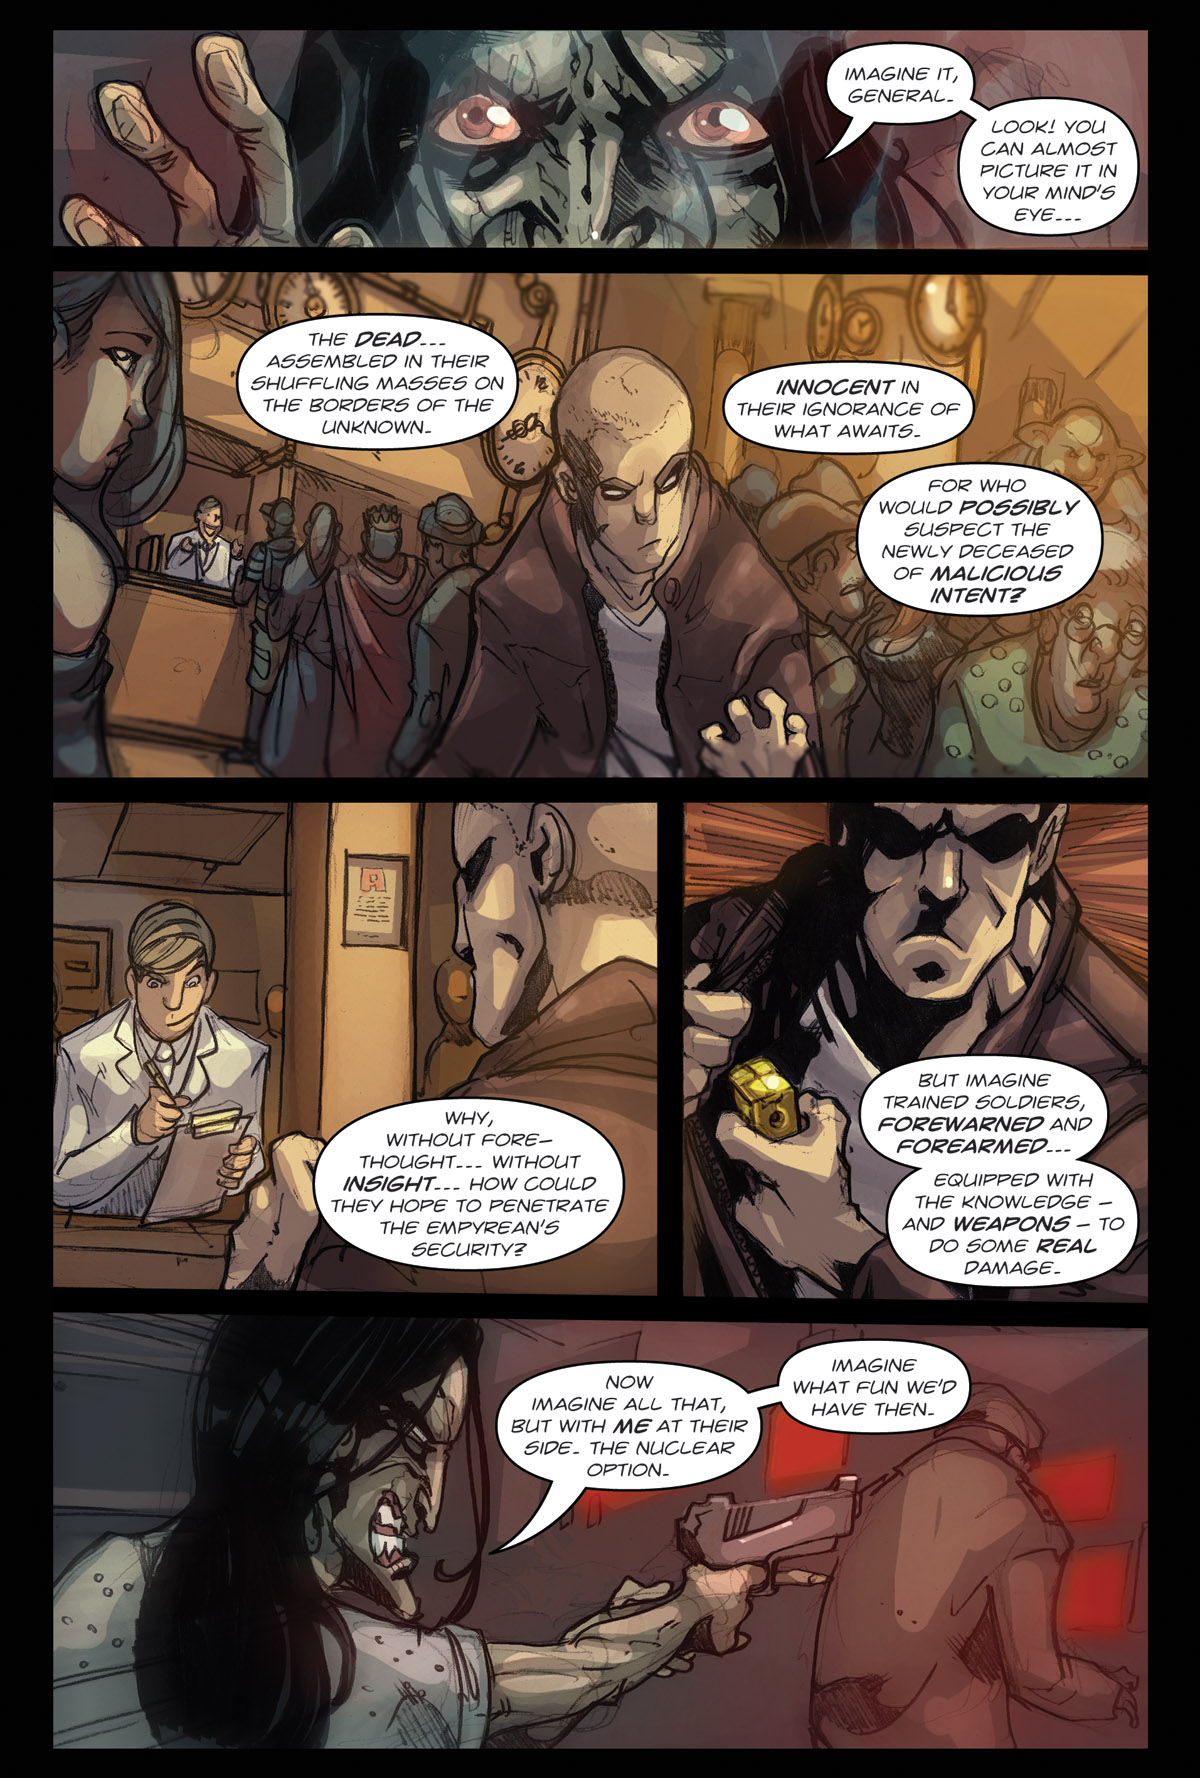 Afterlife Inc. | Near Life | Page 14